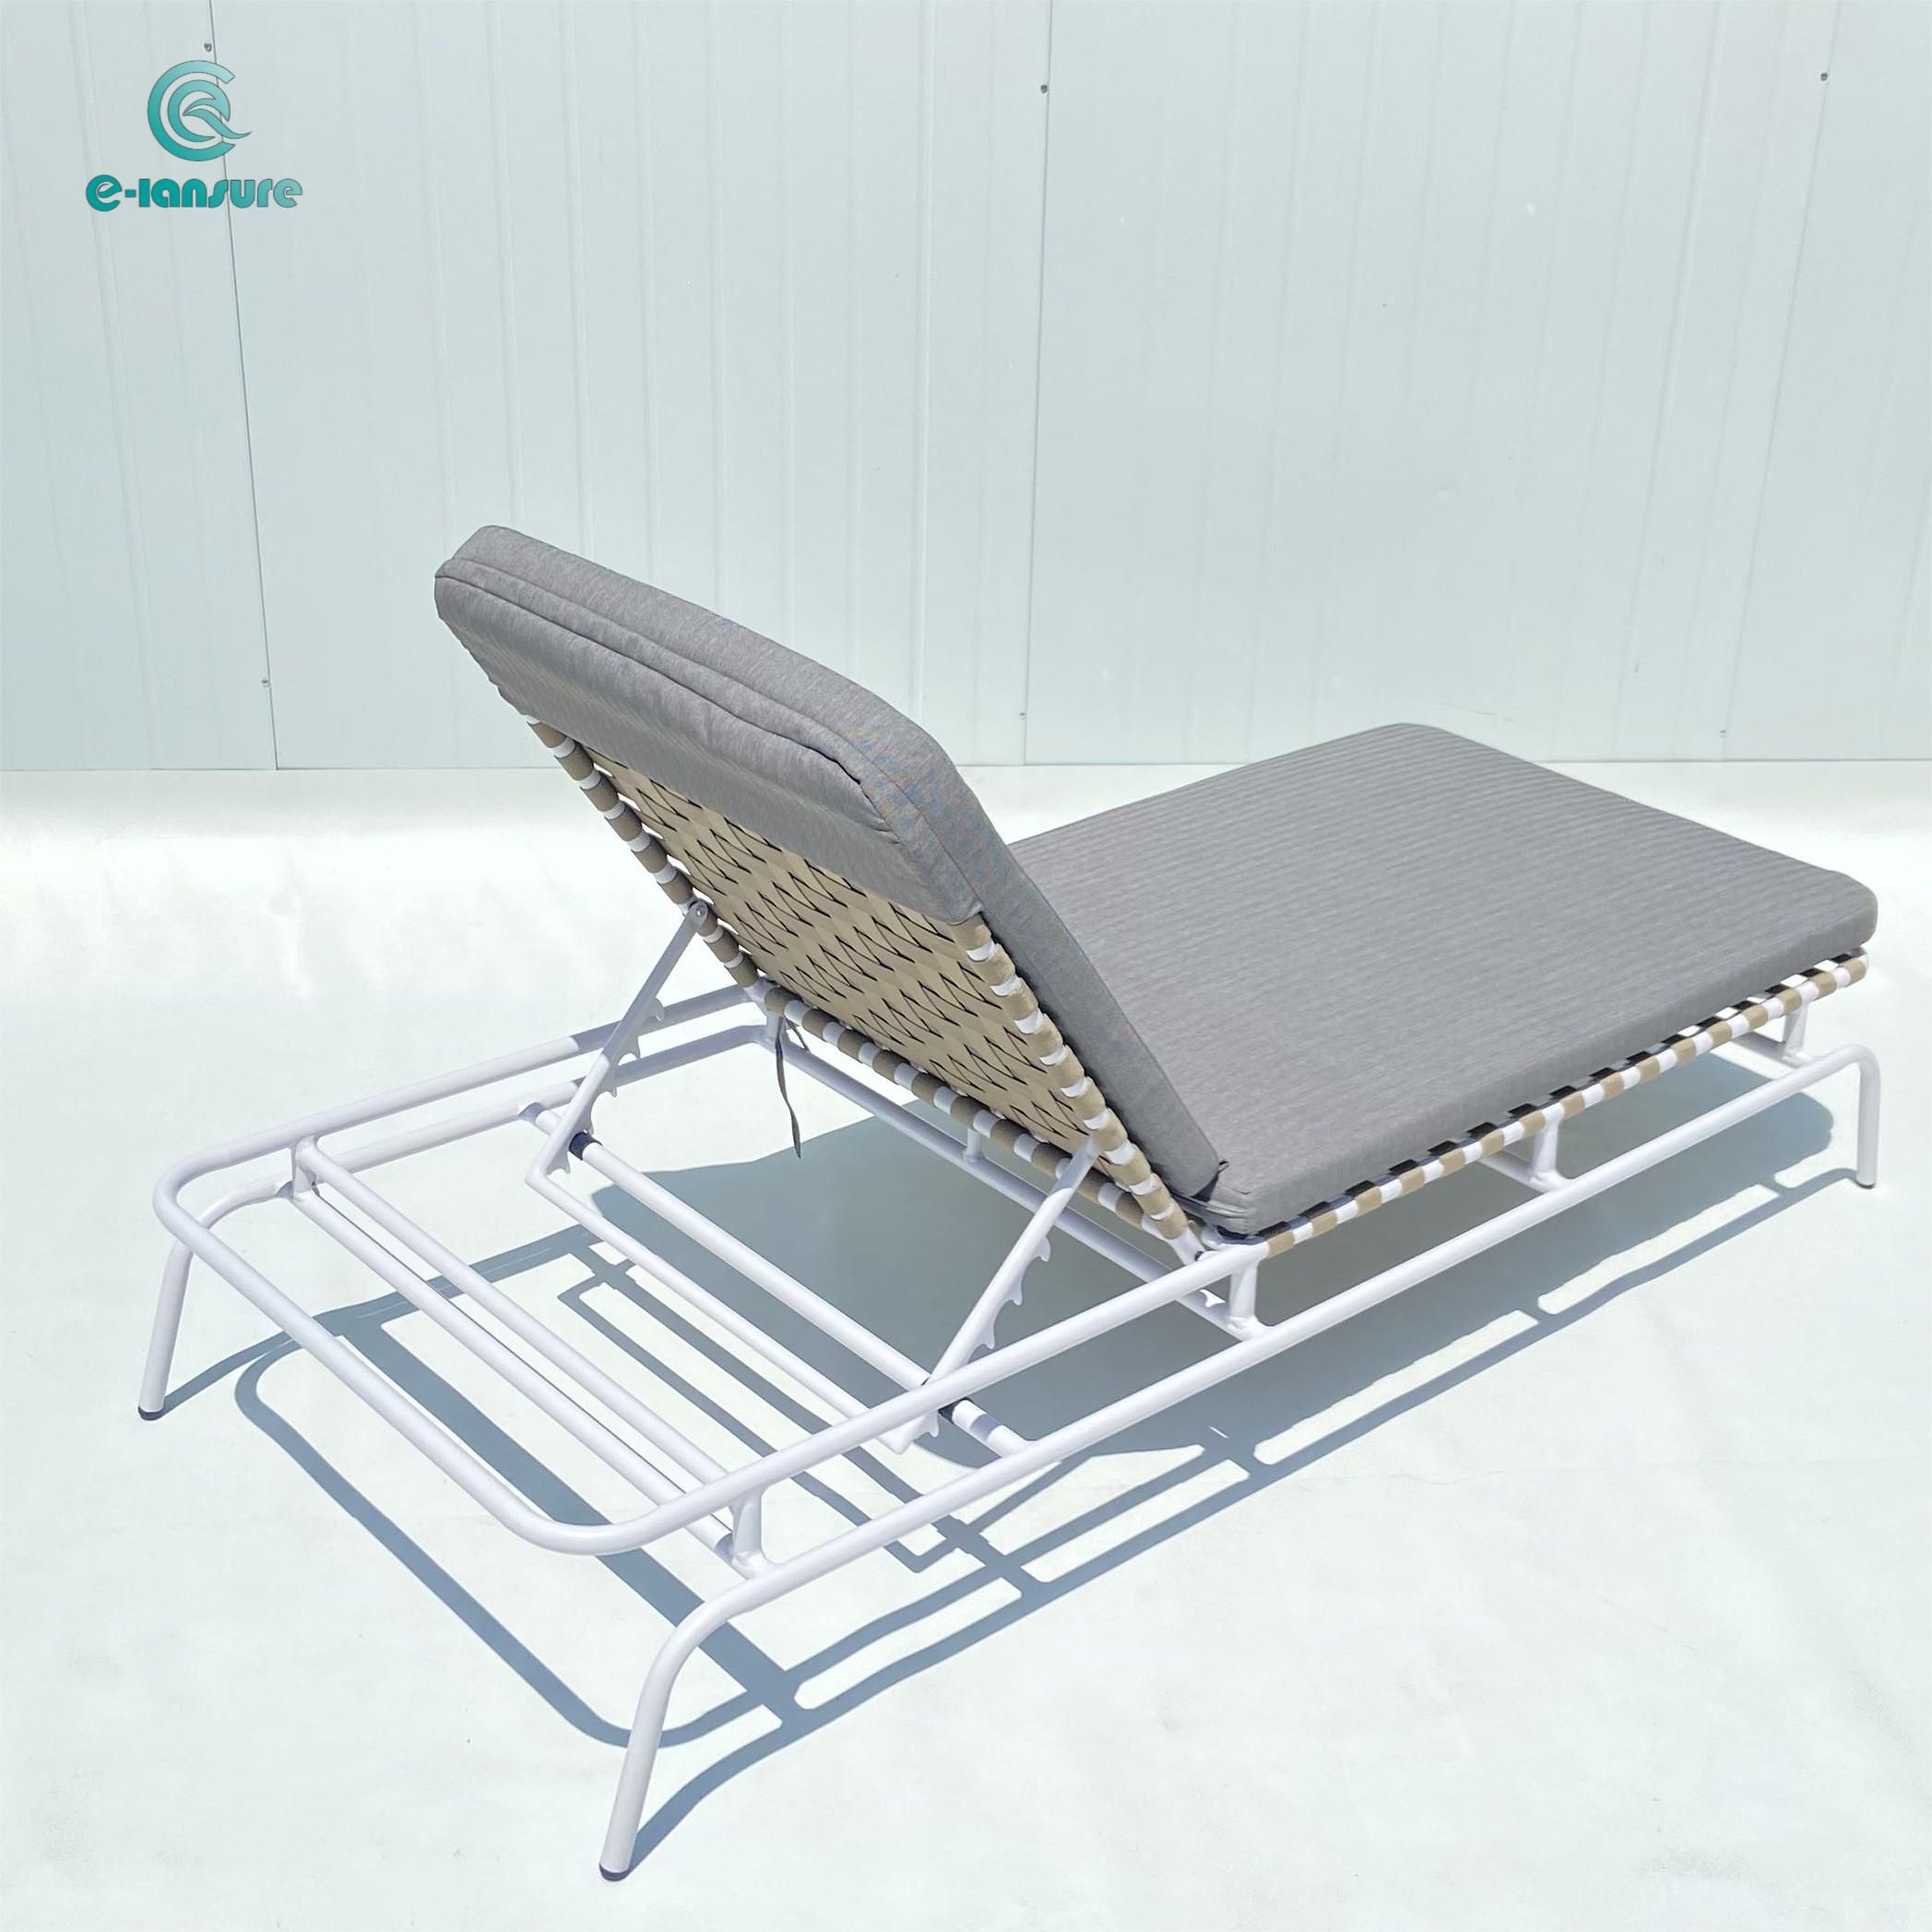 Garden sun bed comfort Adjustable rope recliner with cusion